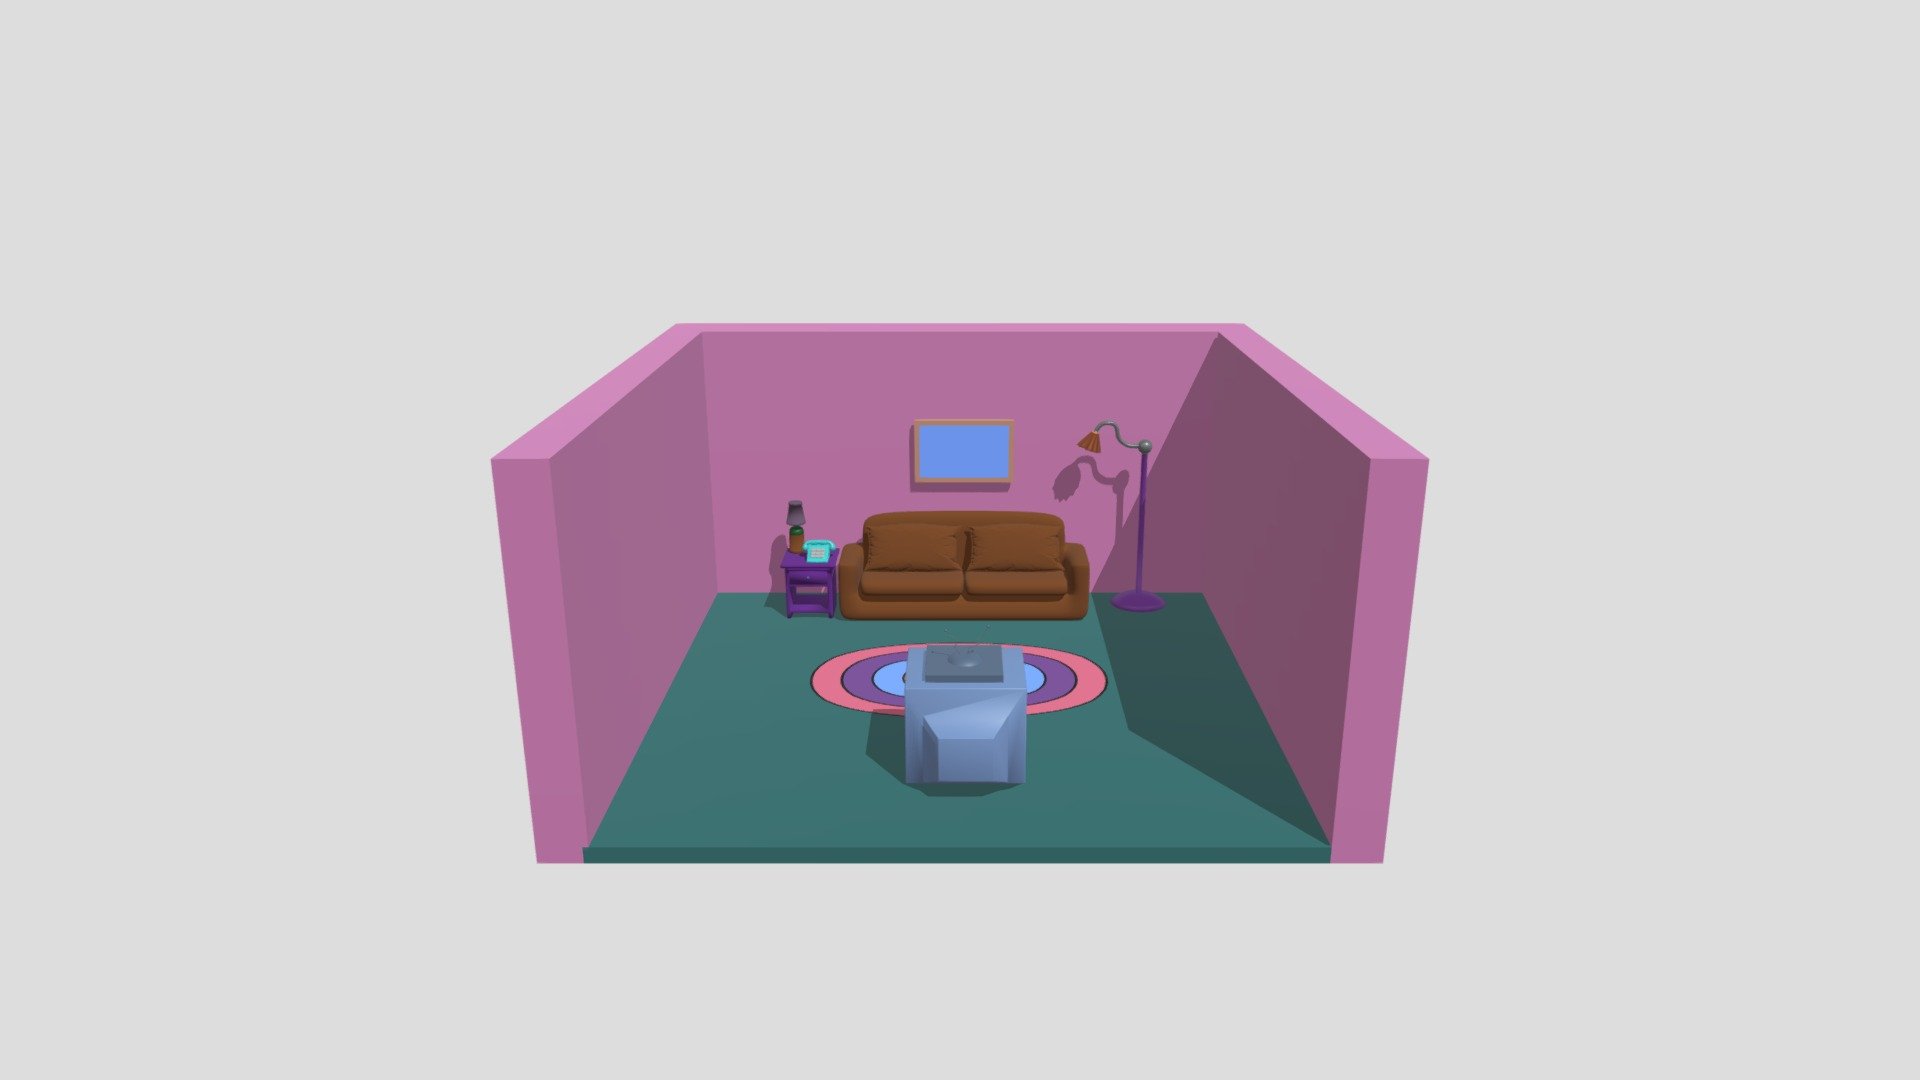 A 3D Living Room model from the cartoon series &ldquo;The Simpsons